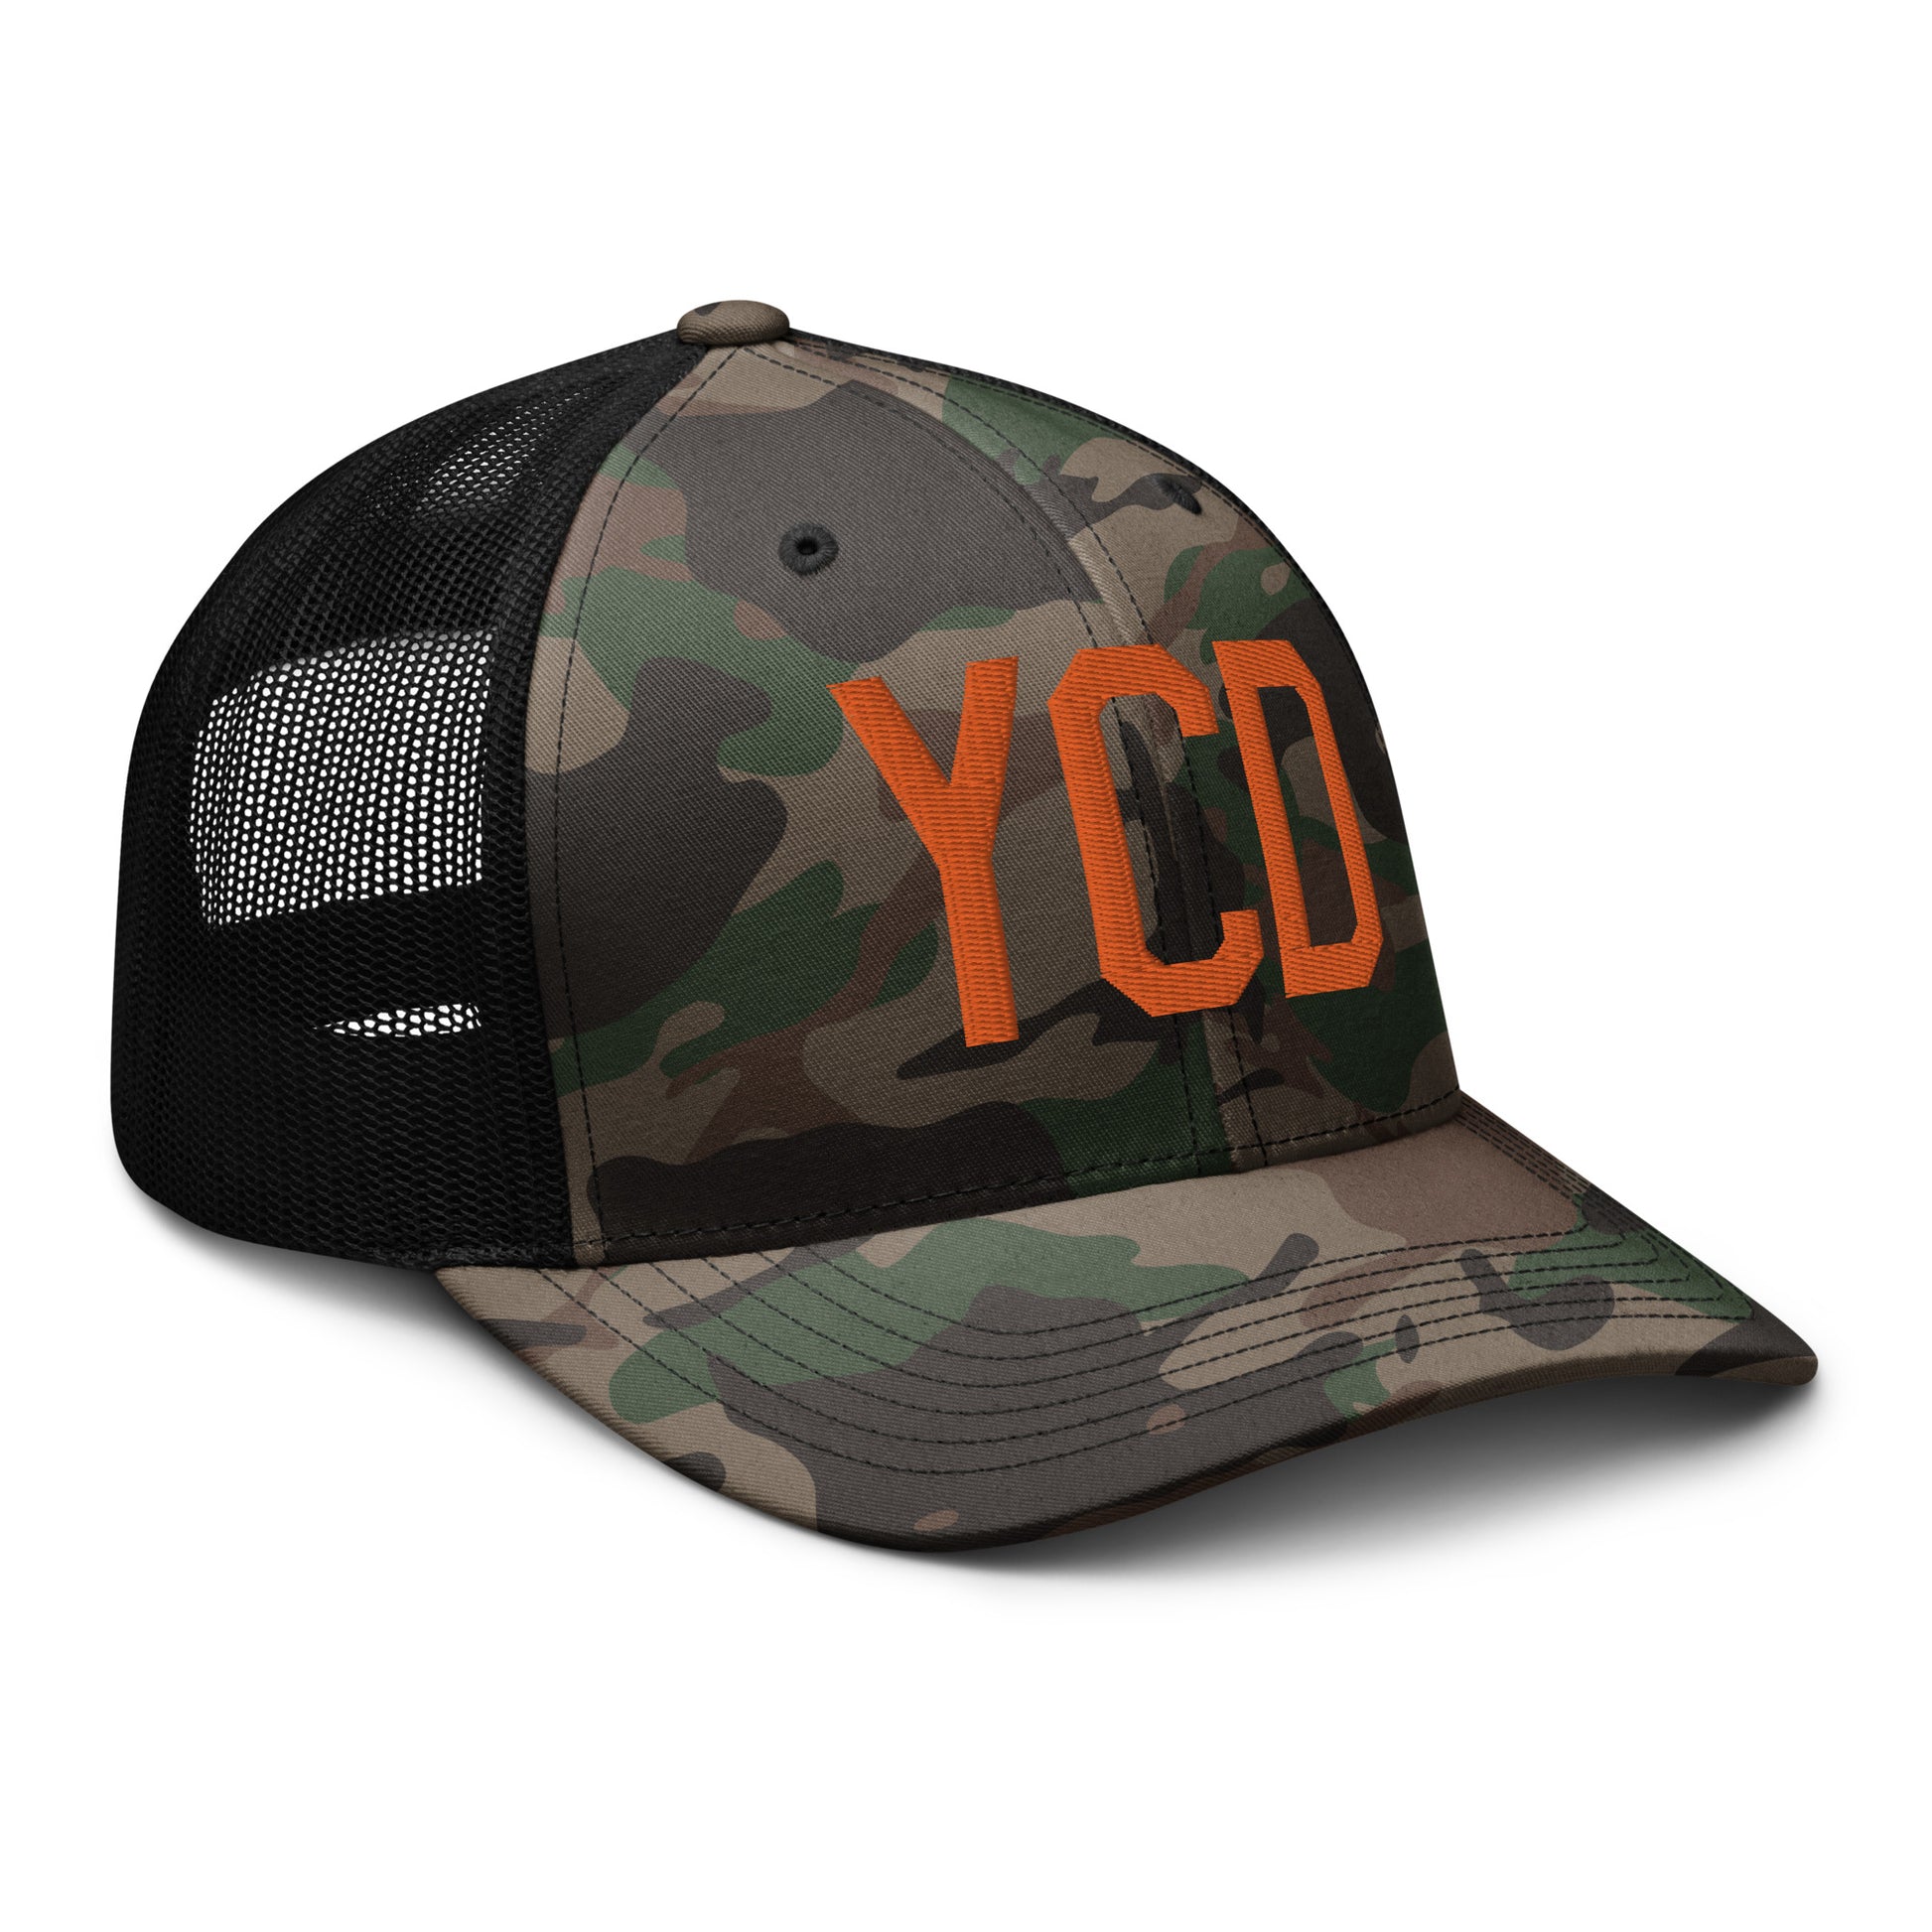 Airport Code Camouflage Trucker Hat - Orange • YCD Nanaimo • YHM Designs - Image 12